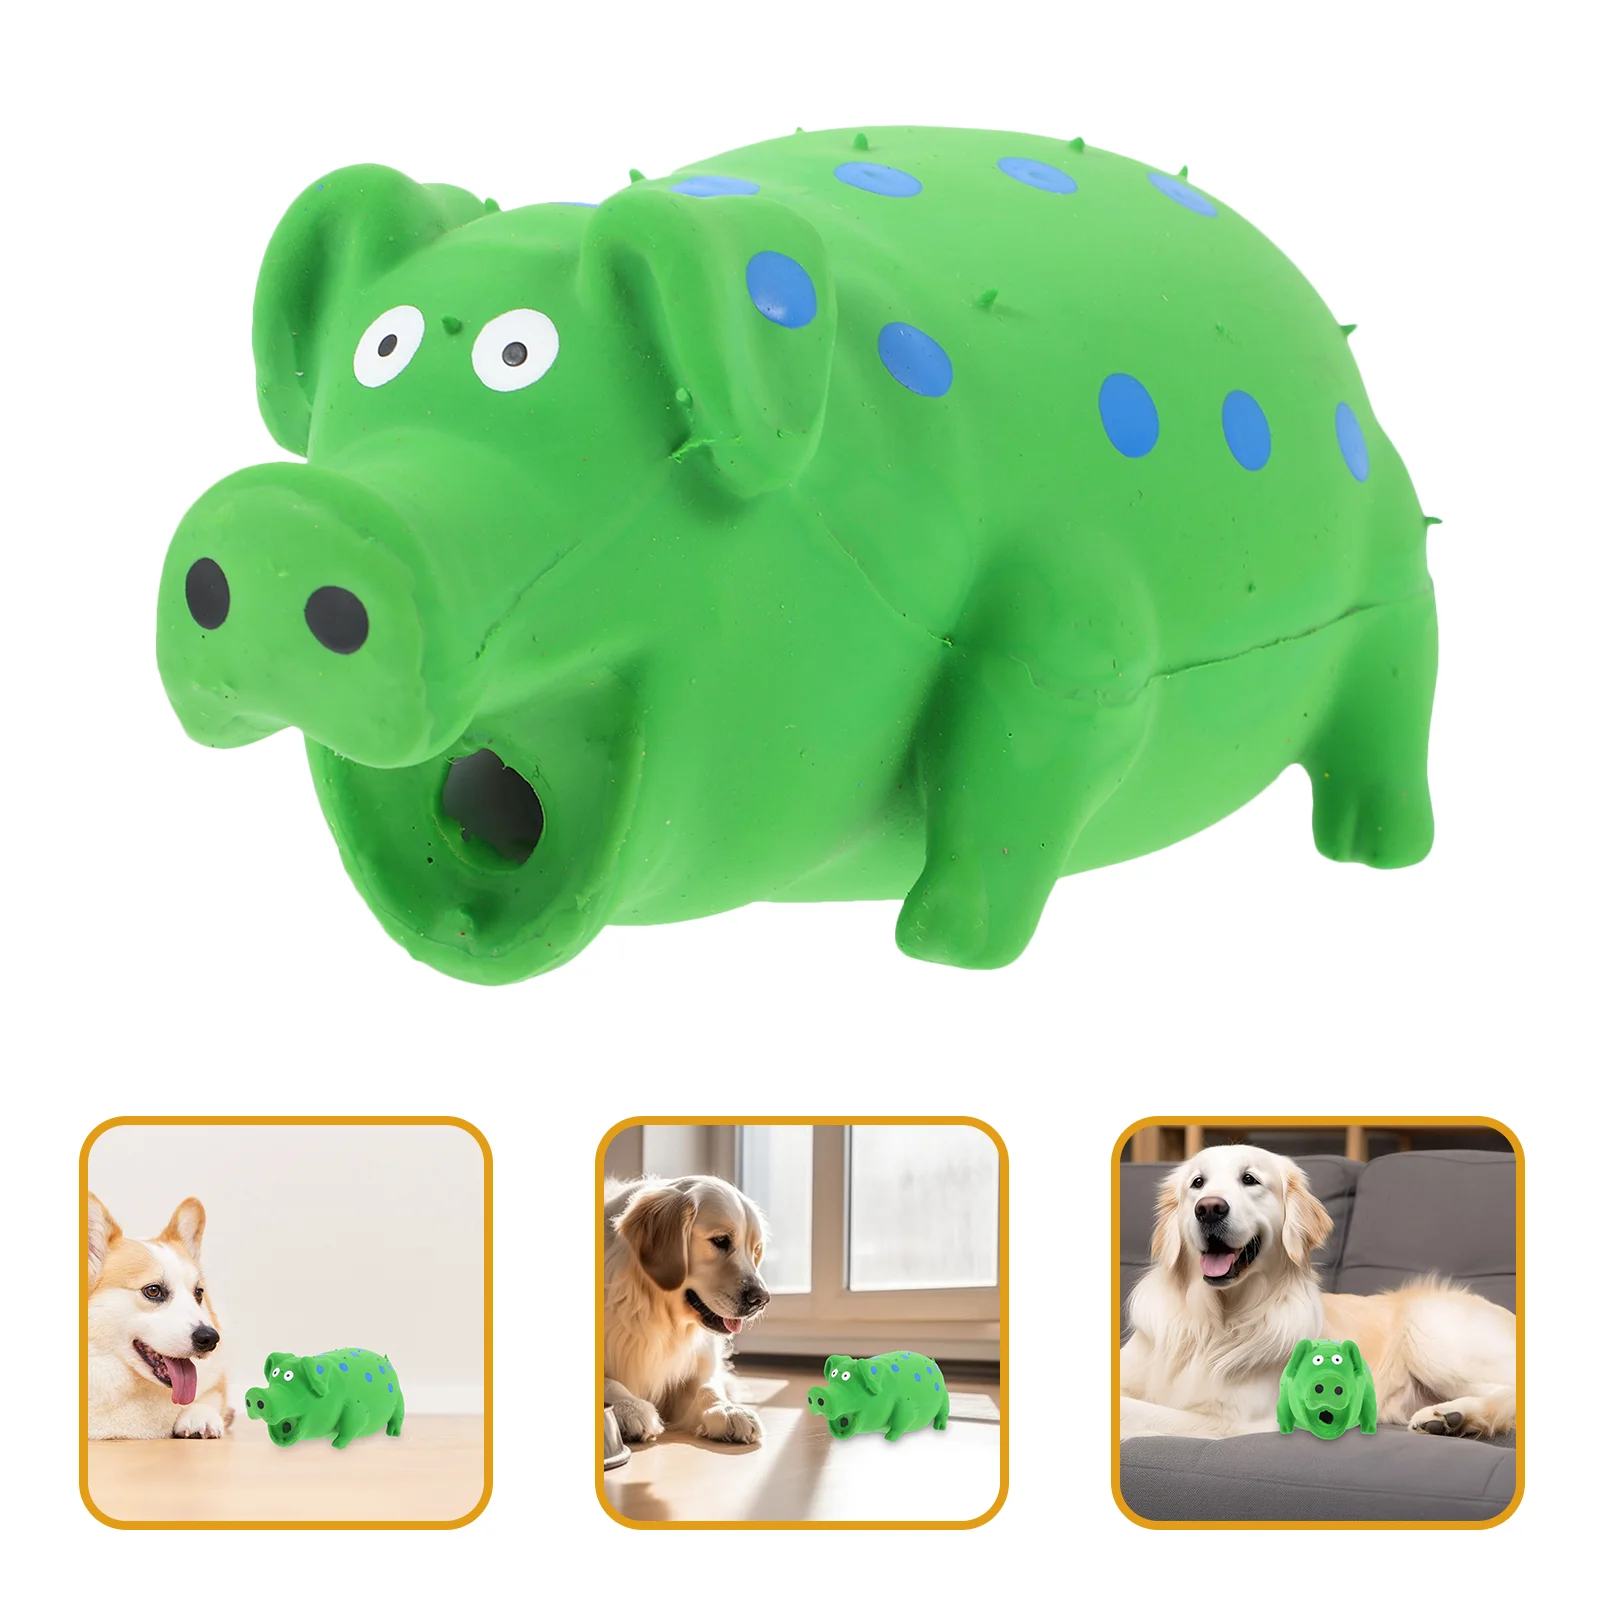 

Adorable Bite Toy Creative Chew Supply Funny Sound Toy Educational Pig Toy Teeth Grinding Toy for Pet Dog (Green Pig)